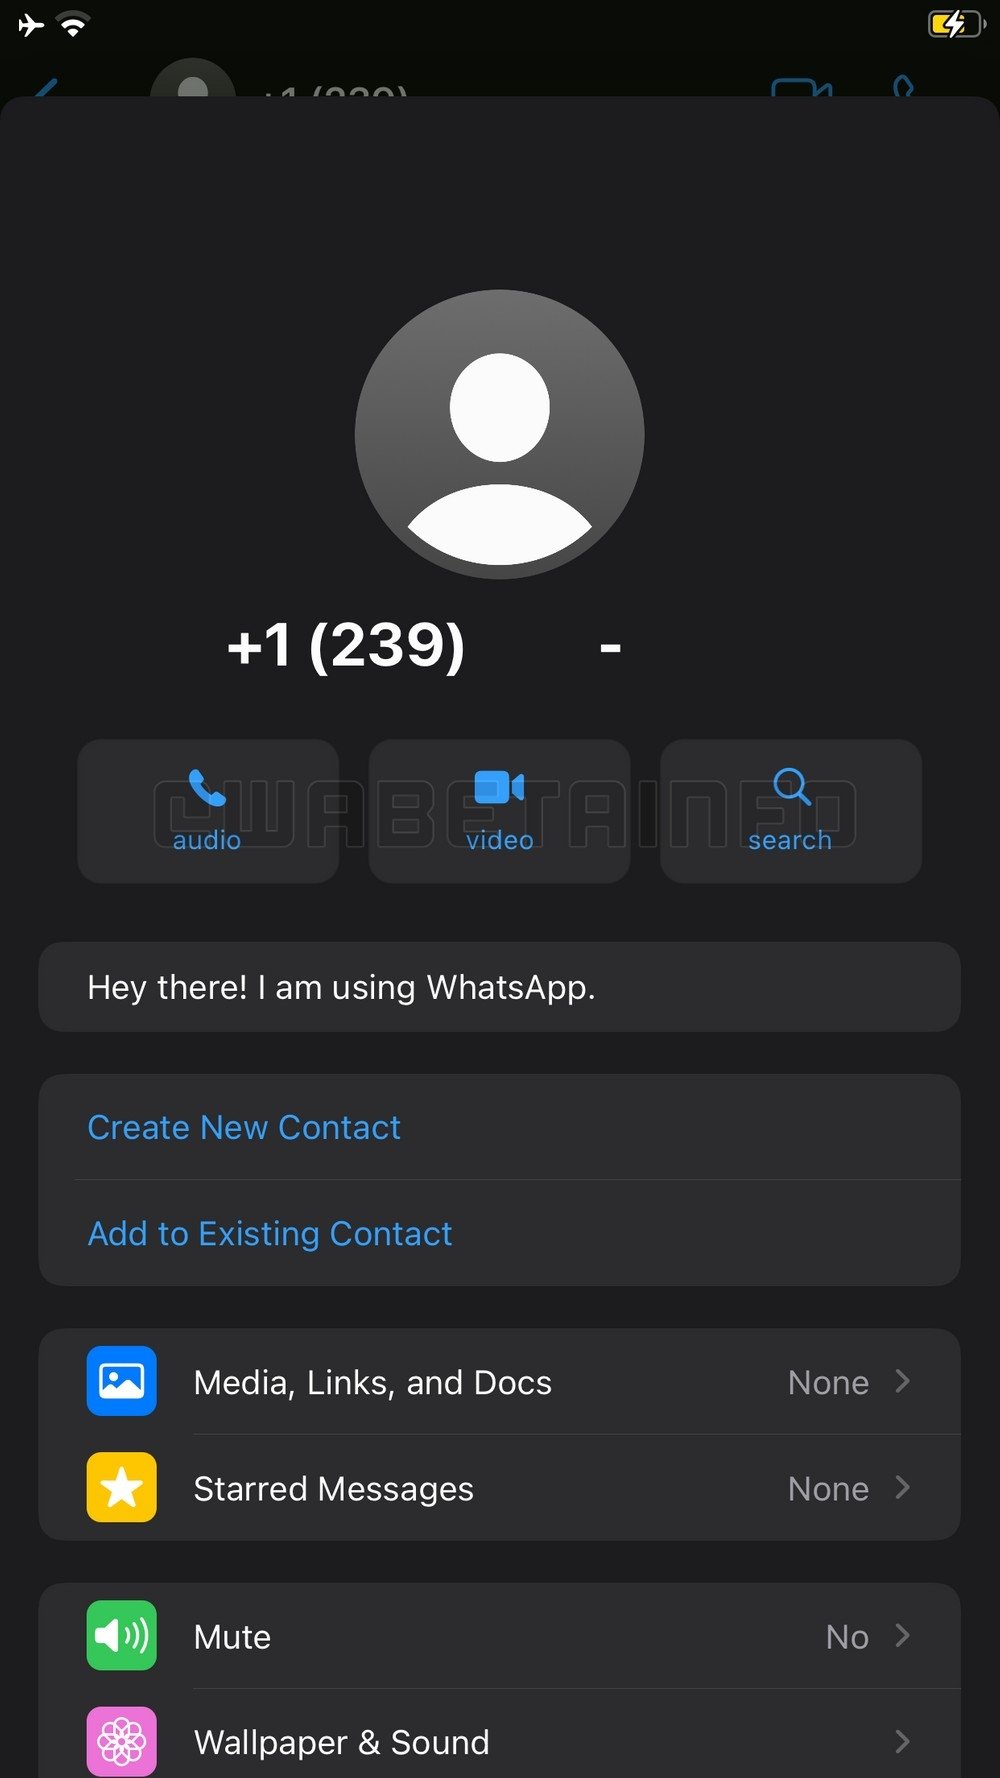 WhatsApp with a new contacts interface